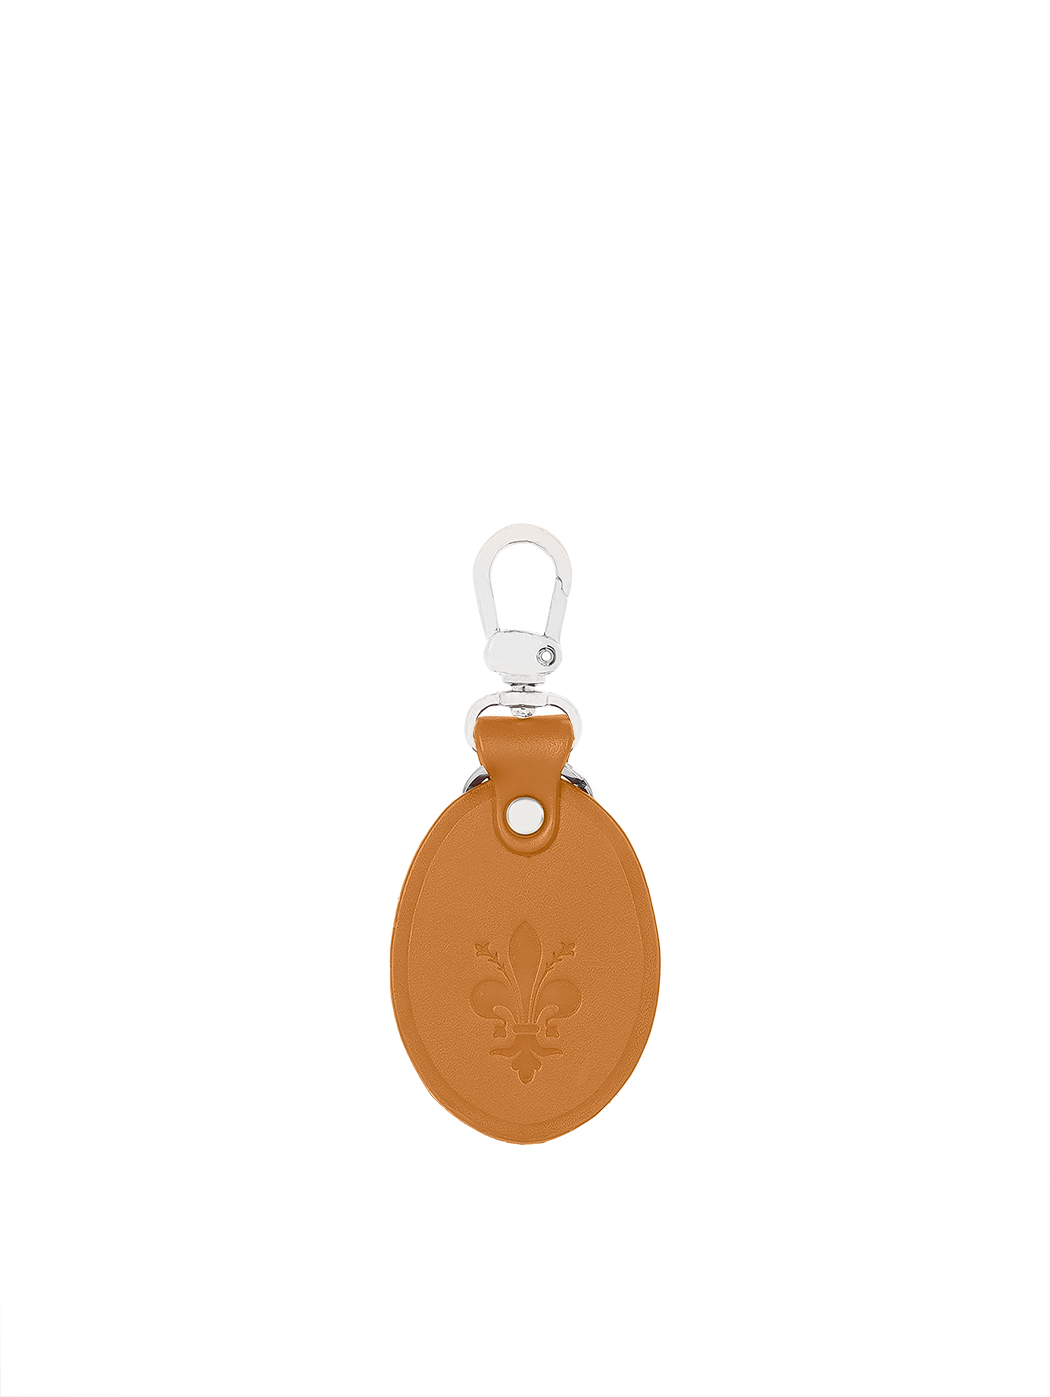 Cuoio Leather Key Lanyard, embossed Giglio Tobacco